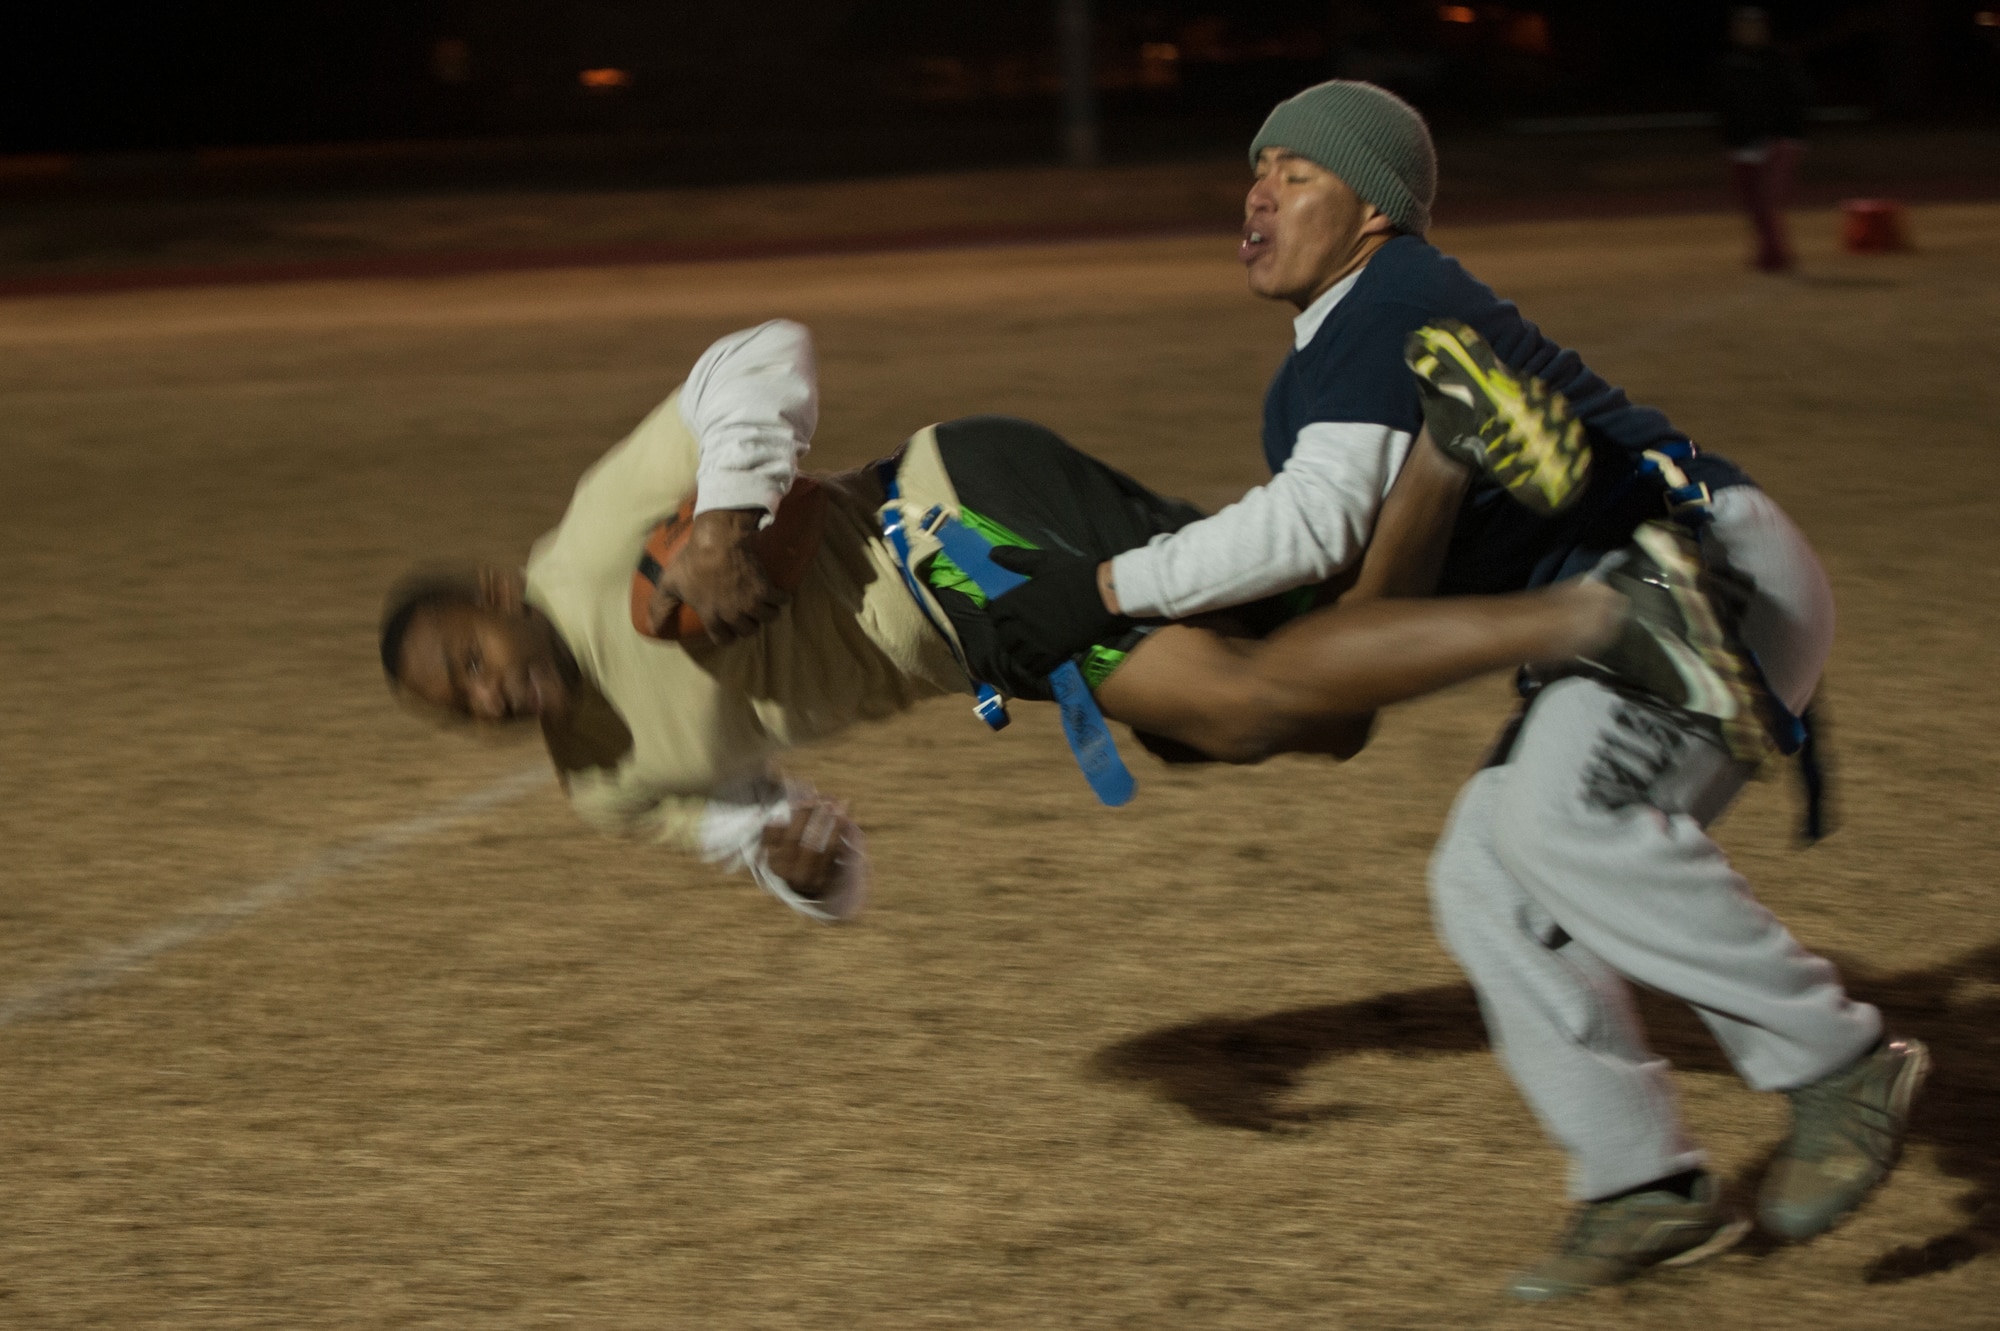 Staff Sgt. Victor White, a 19th Maintenance Squadron wide receiver, gets tripped up while trying to get a first down Nov. 17, 2014, at Little Rock Air Force Base, Ark. (U.S. Air Force photo by Senior Airman Kaylee Clark)